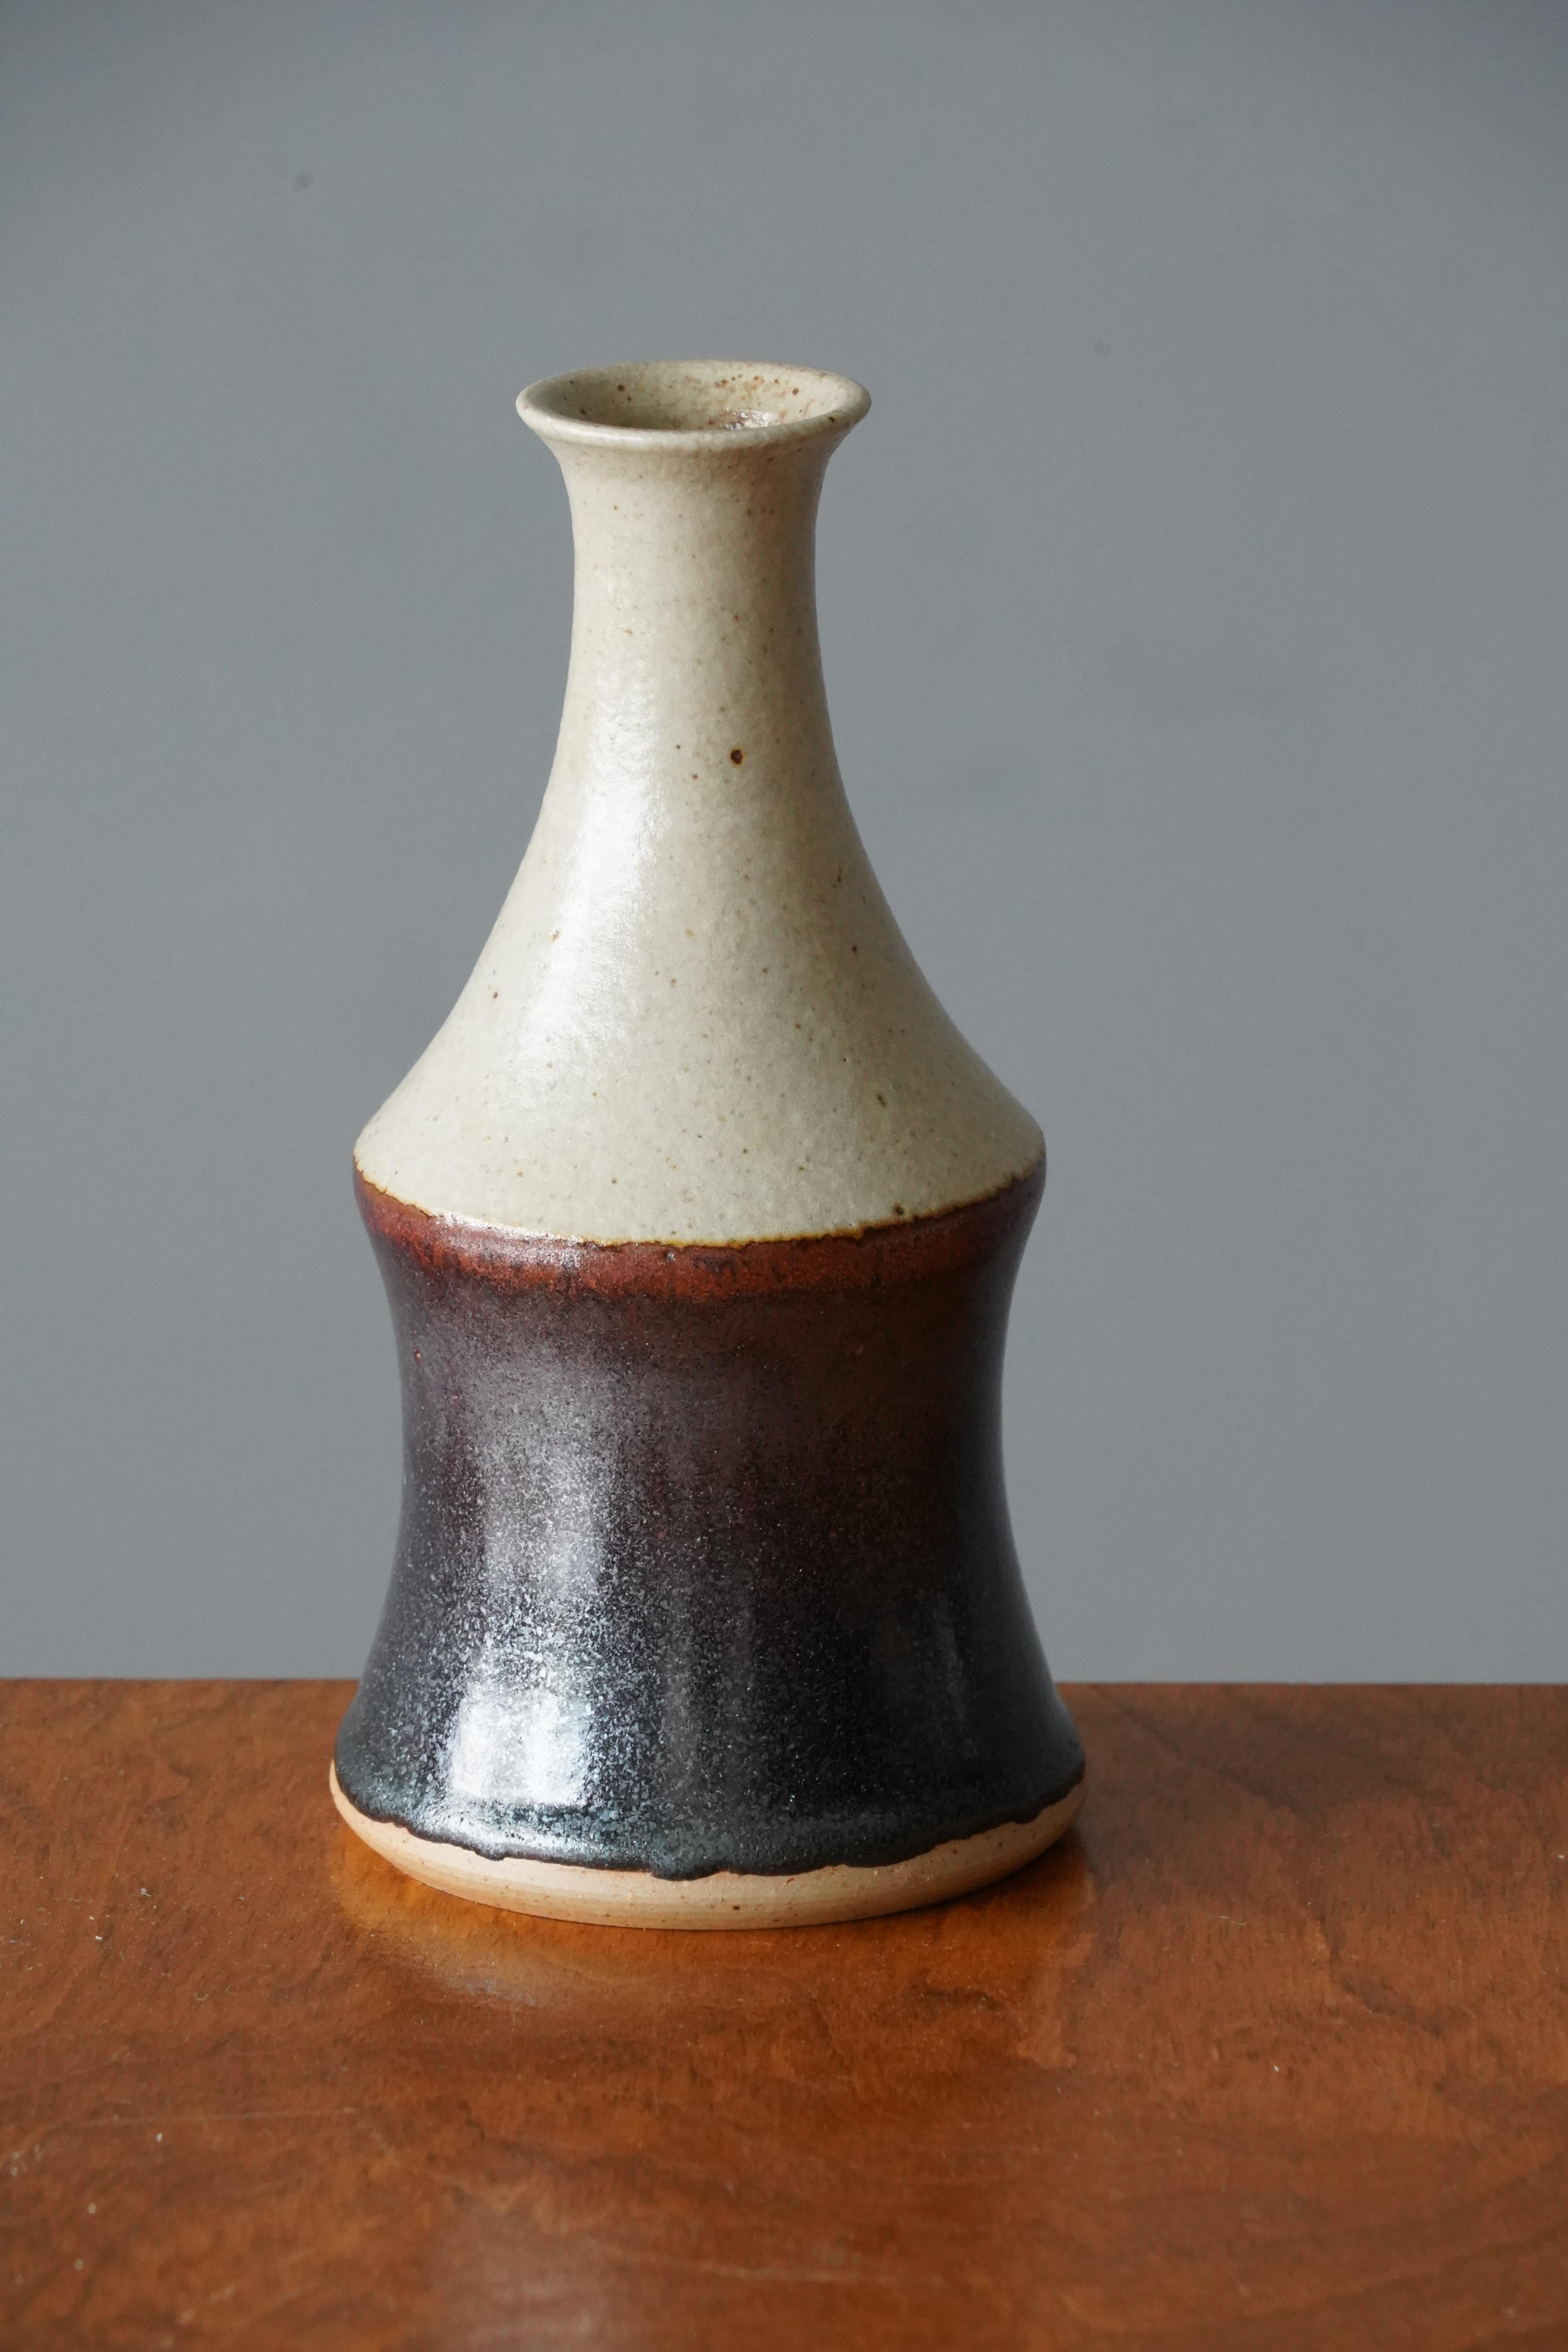 A vase, designed by John Andersson, for Höganäs Keramik, Sweden, c. 1950s-1960s. 

Features glazed stoneware. Artistic glaze in grey with tones of brown and grey.